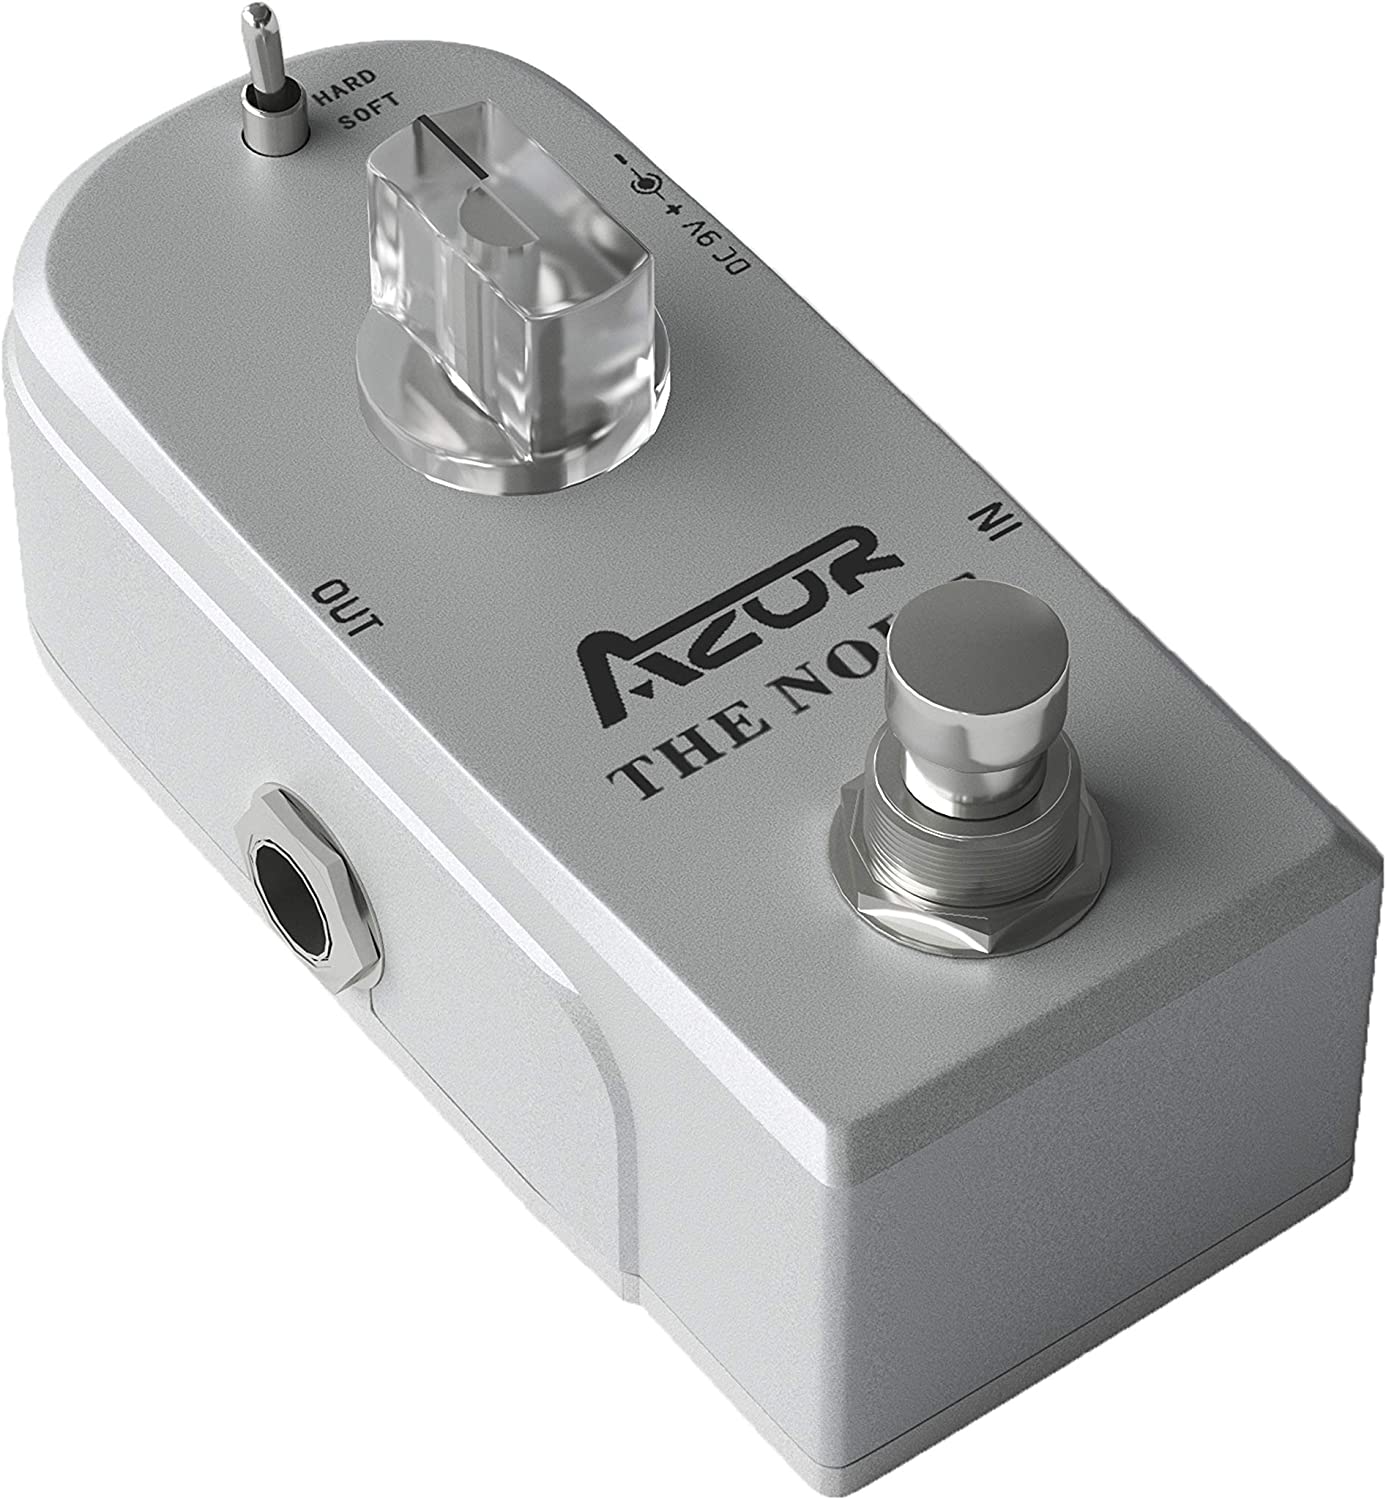 AZOR Noise Gate Pedal on a white background